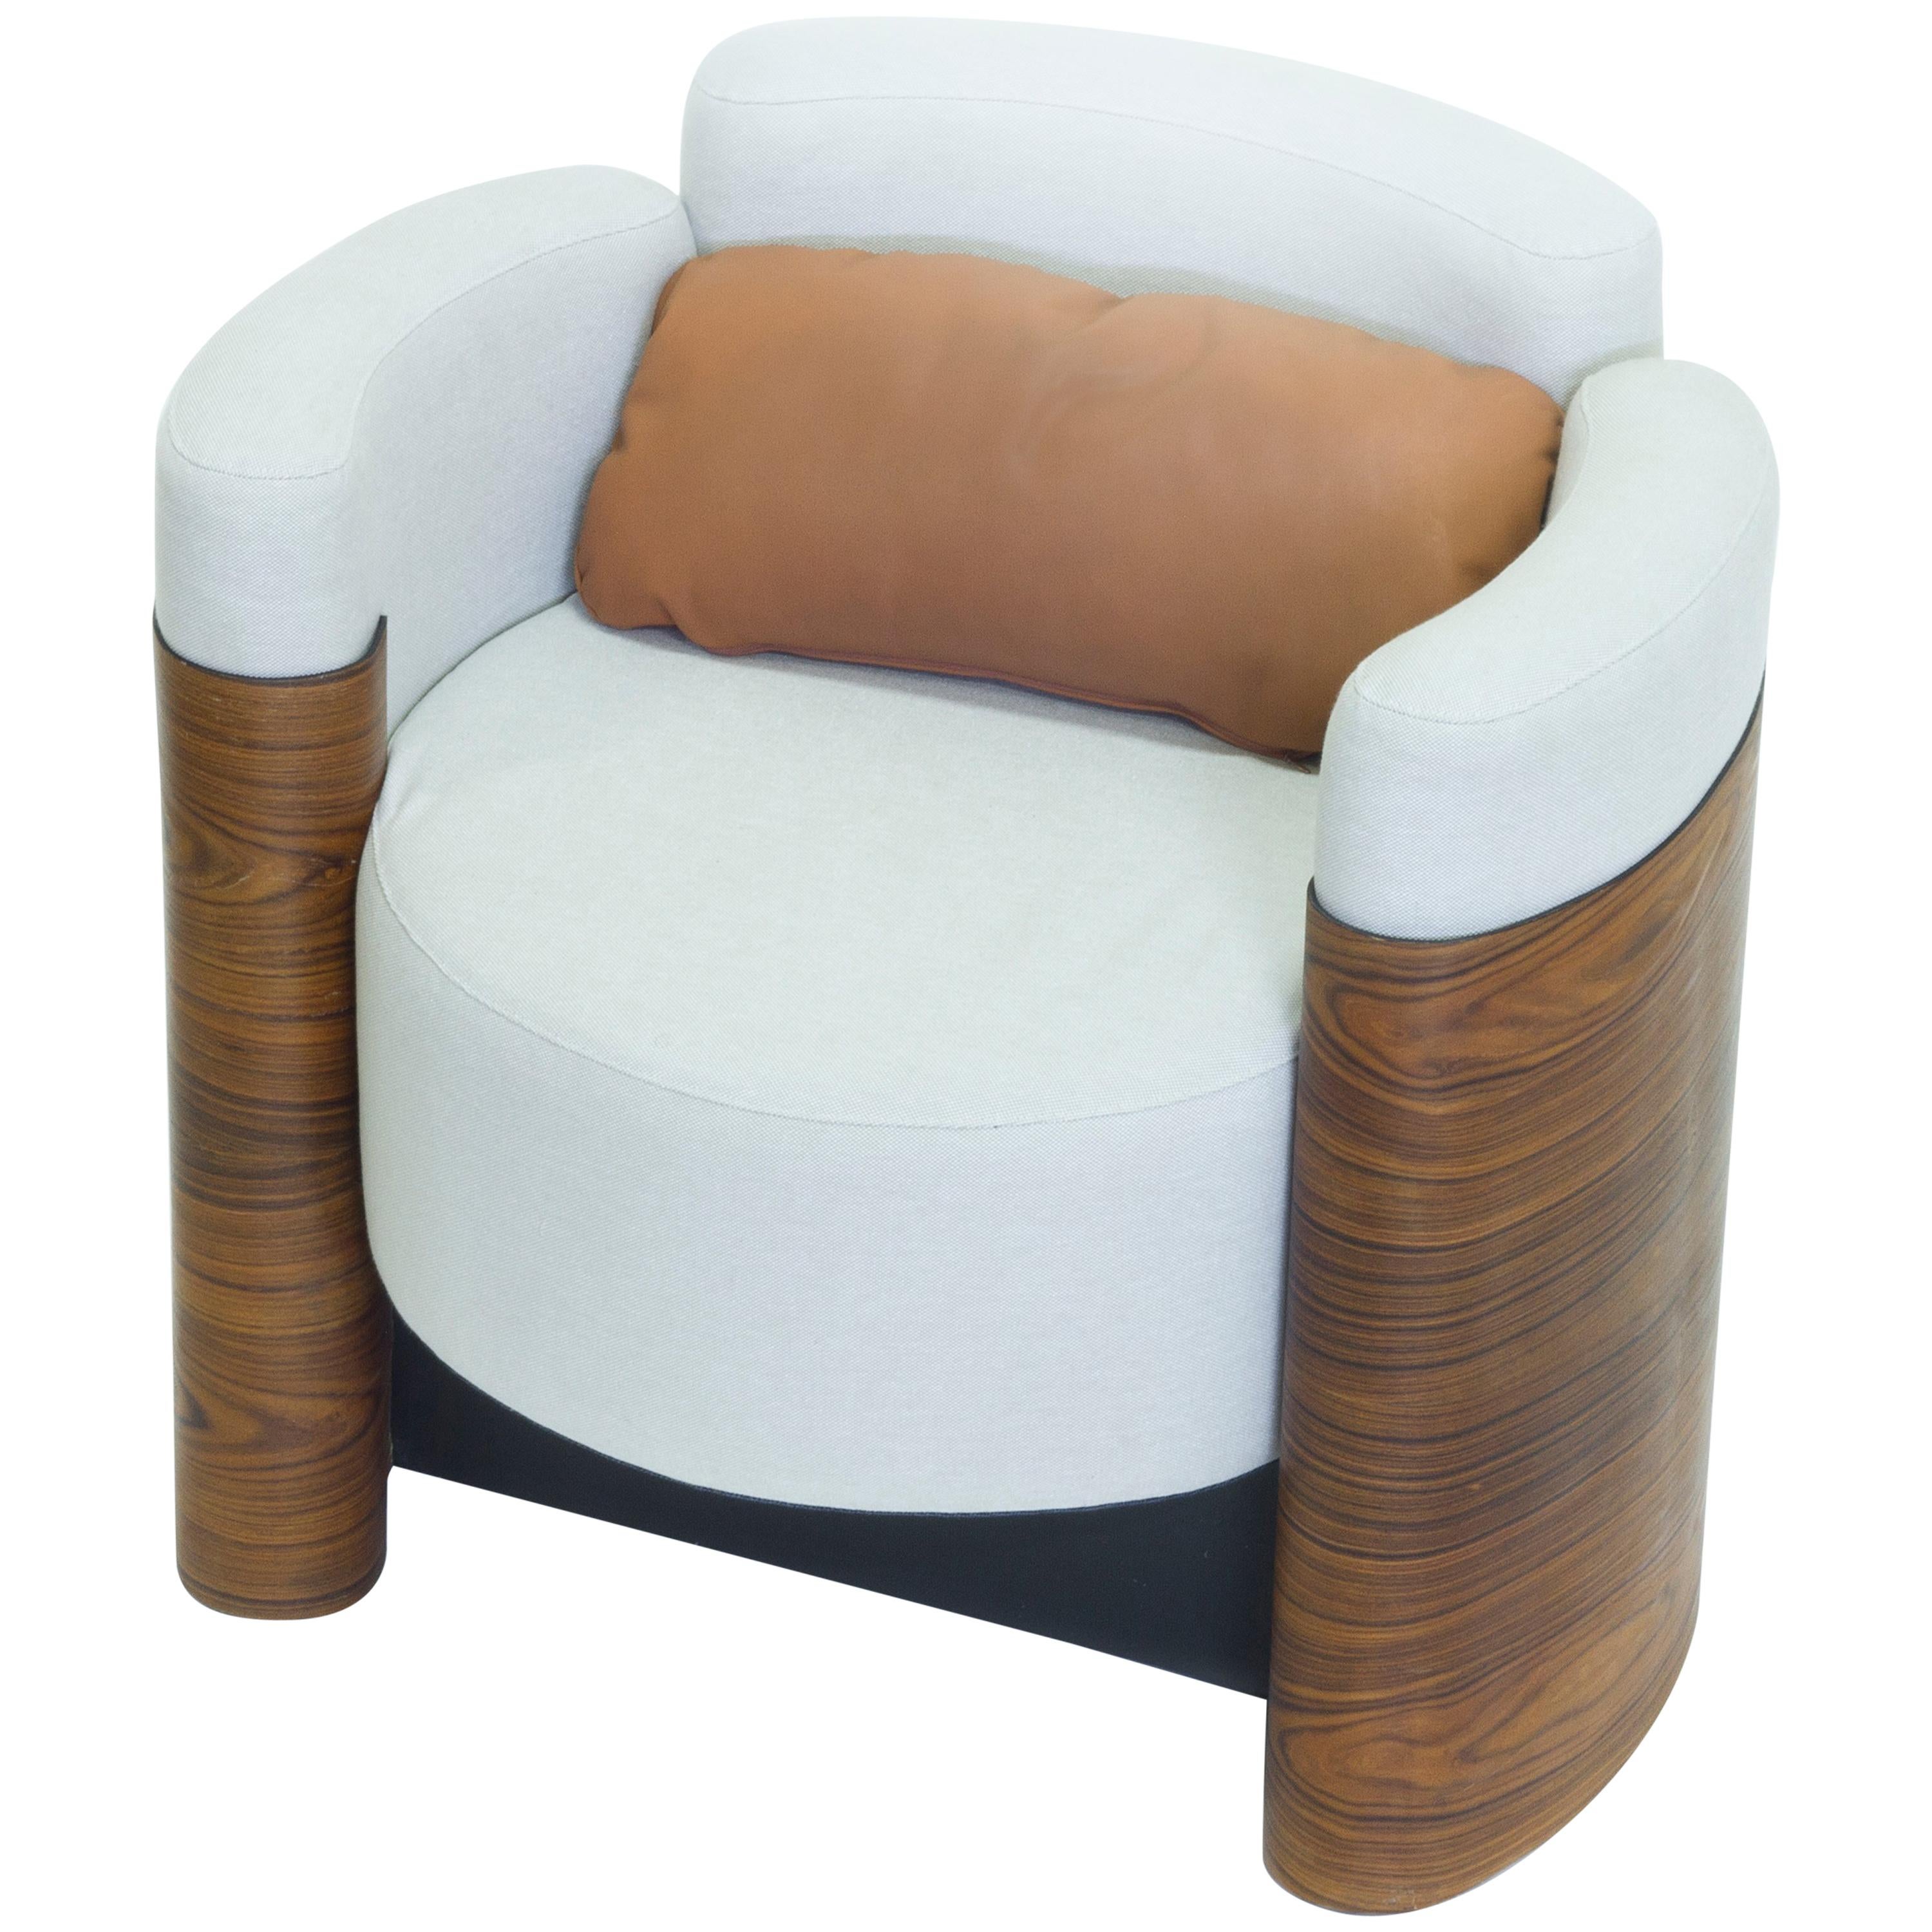 Armchair in Steel, Wood and Upholstery, Brazilian Contemporary Design For Sale